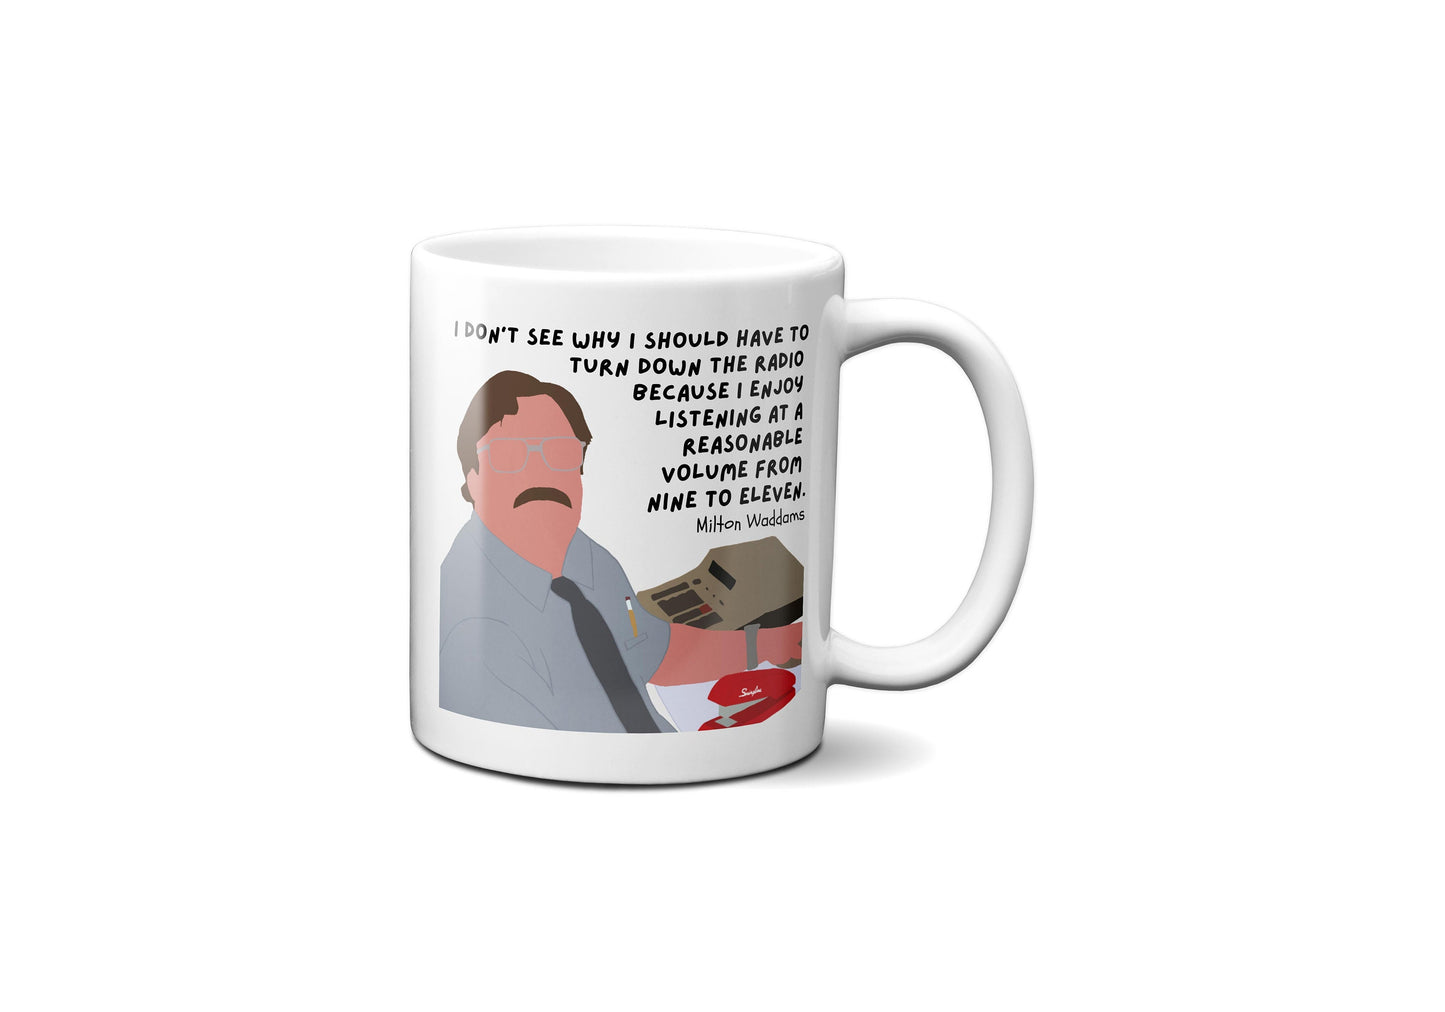 I enjoy listening to the radio at a reasonable volume from 9 to 11 | Milton Waddams Quote Mug | Office Space Mug